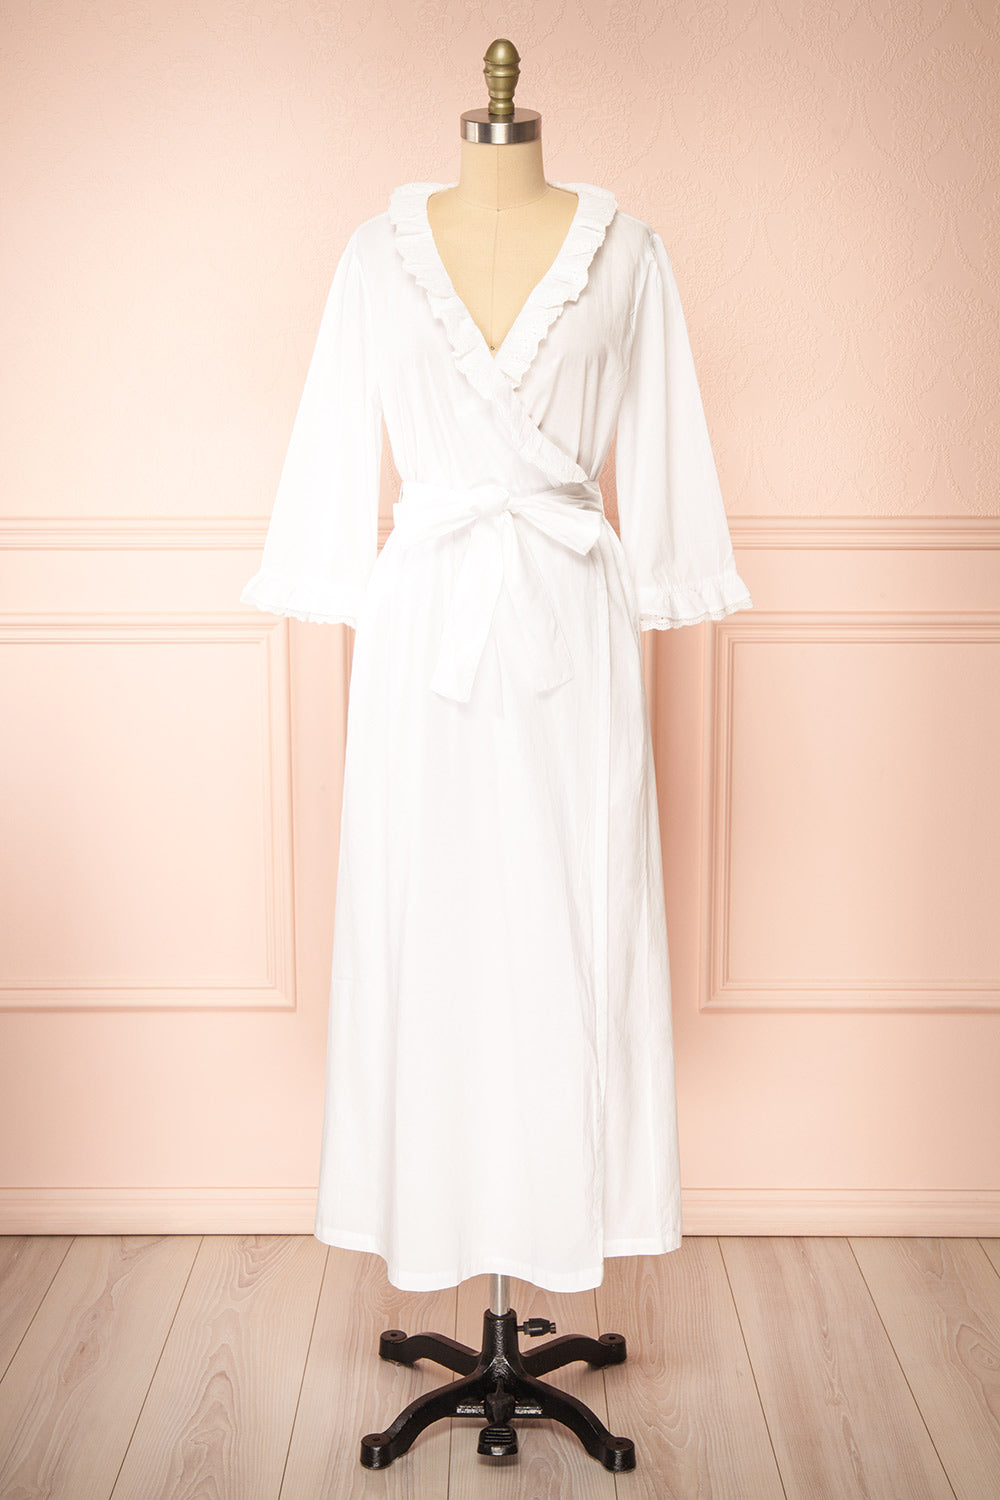 Matilda White Dressing Gown w/ Pockets | Boutique 1861 front view